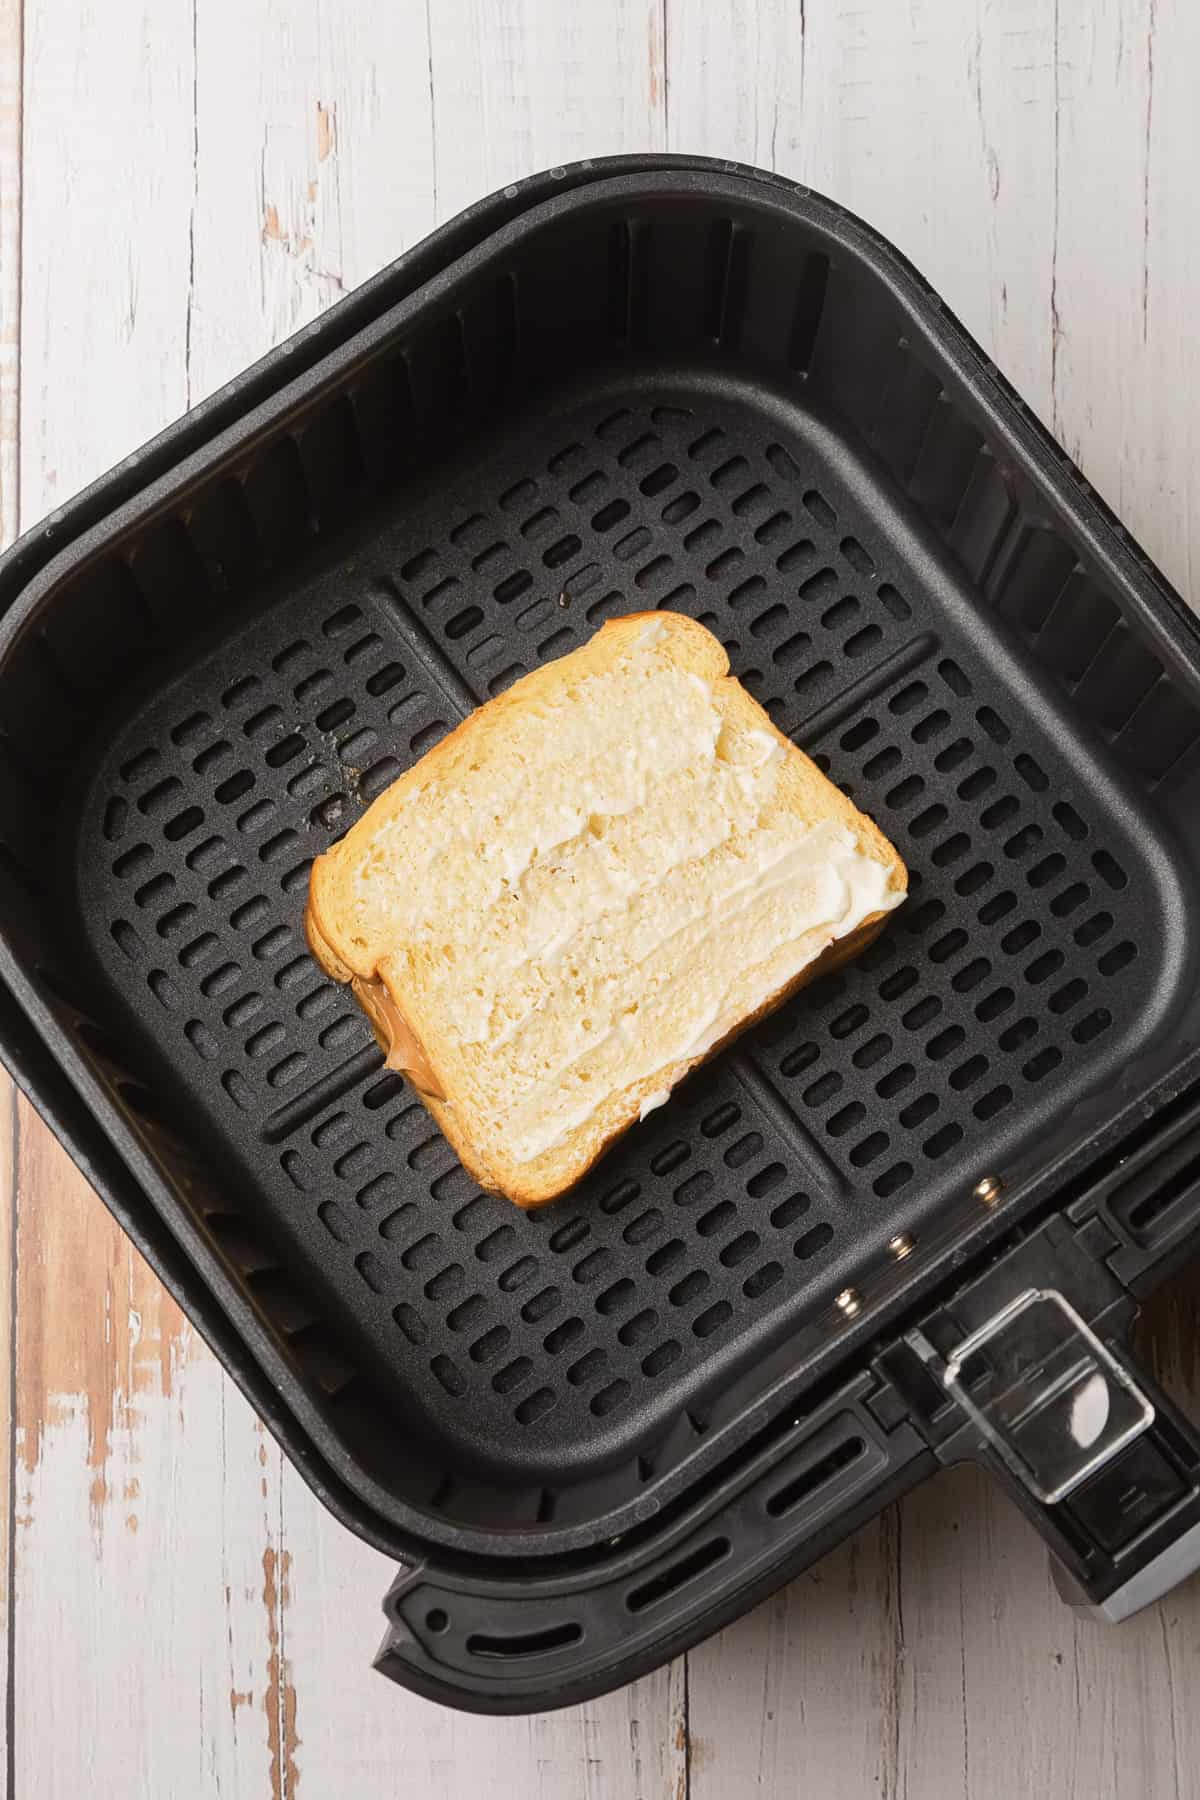 Putting the pbj in the air fryer basket.